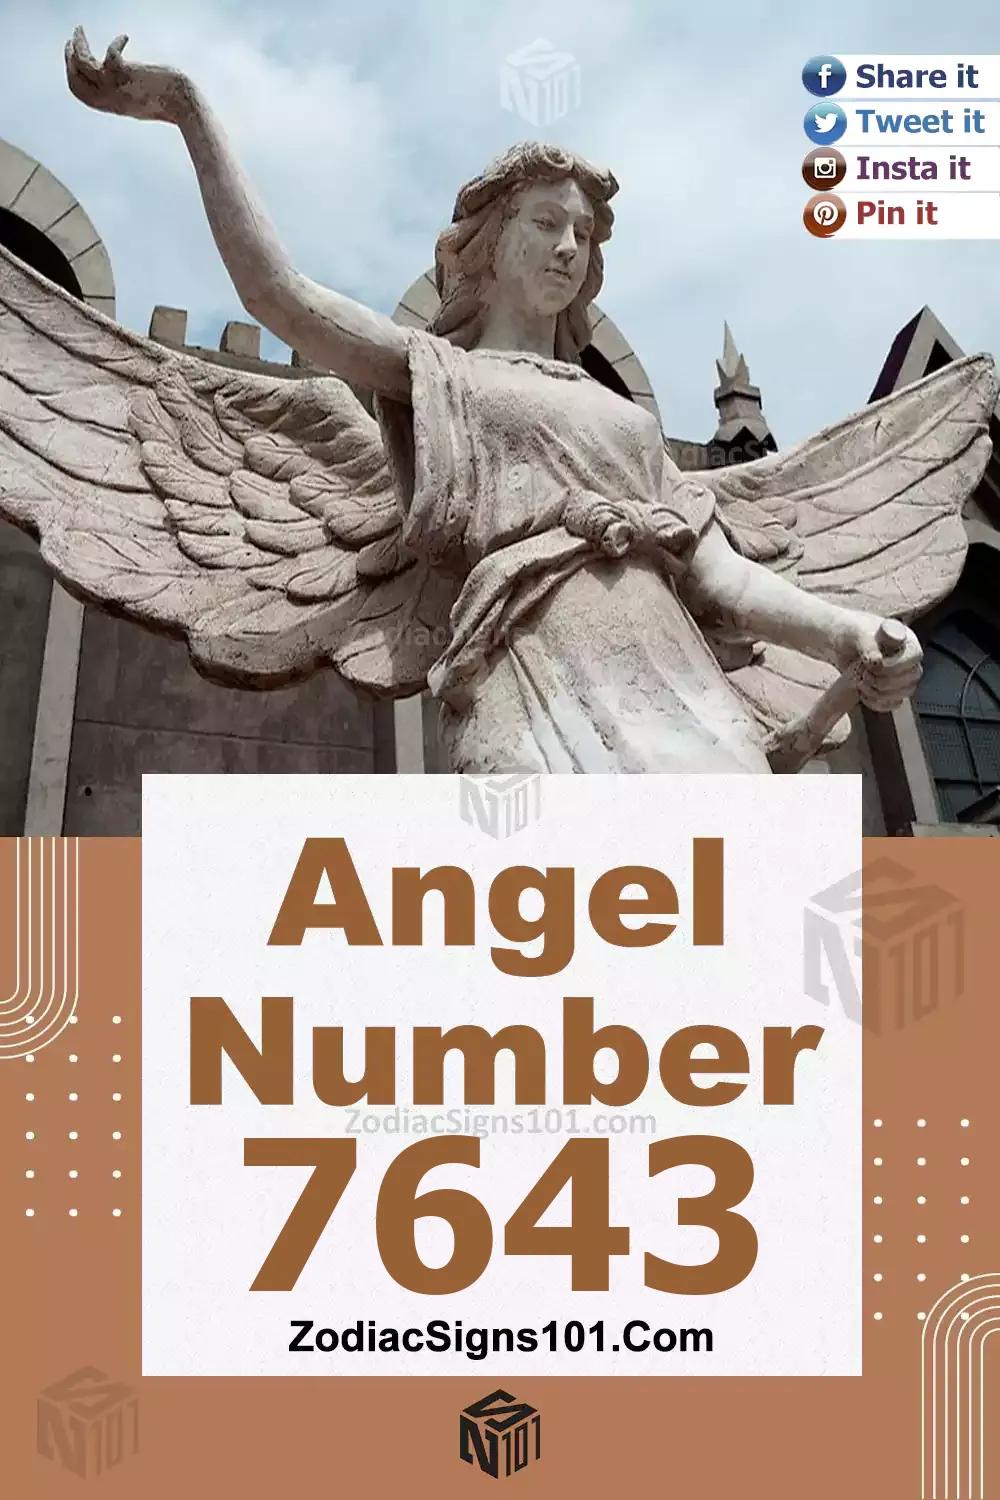 7643 Angel Number Meaning